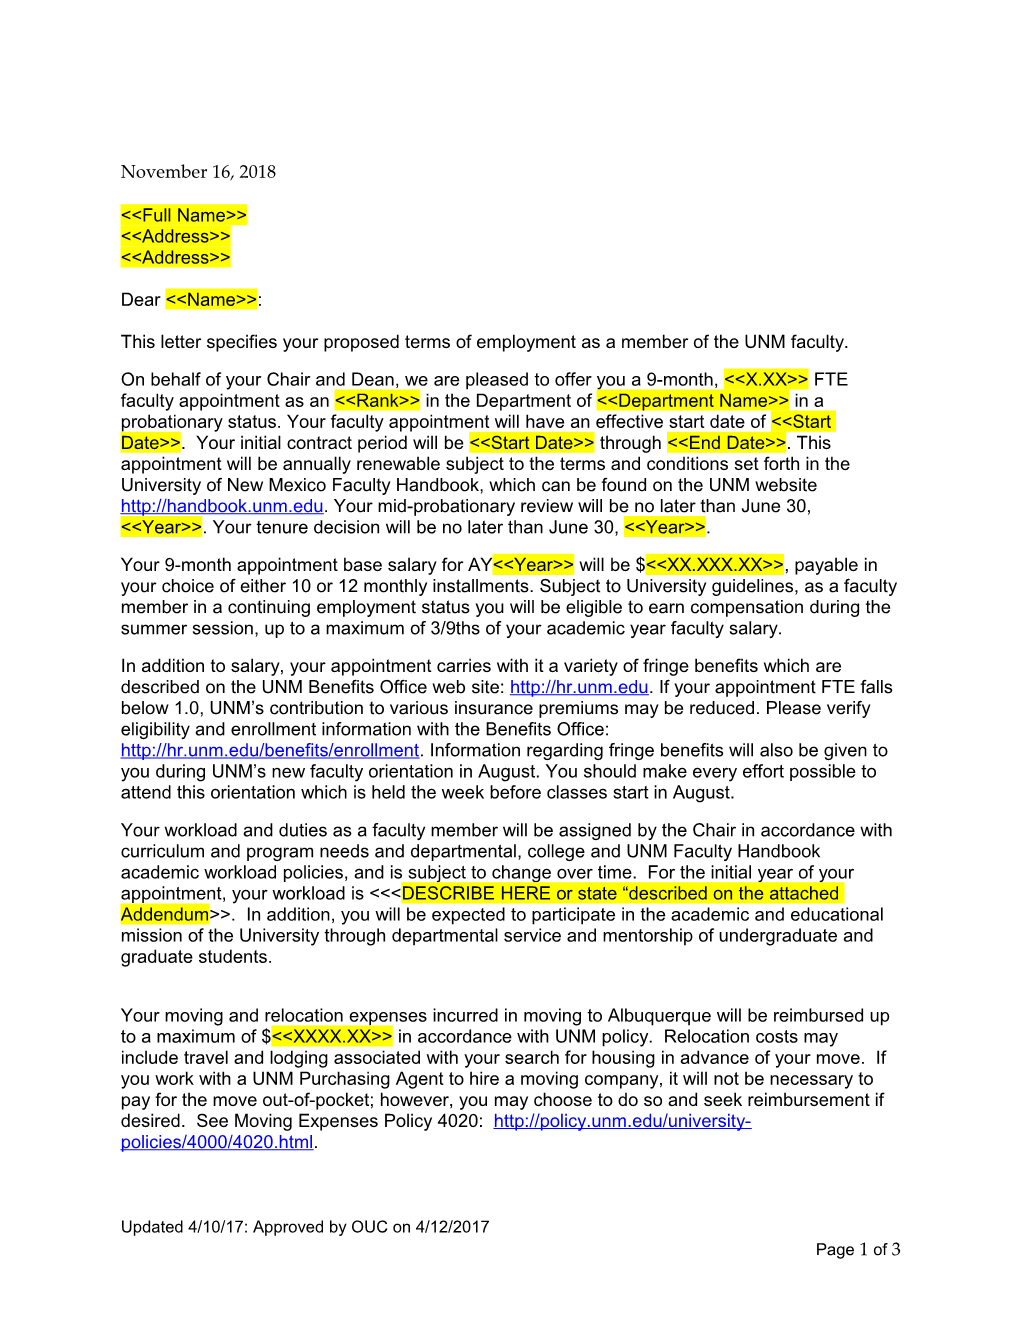 This Letter Specifies Your Proposed Terms of Employment As a Member of the UNM Faculty